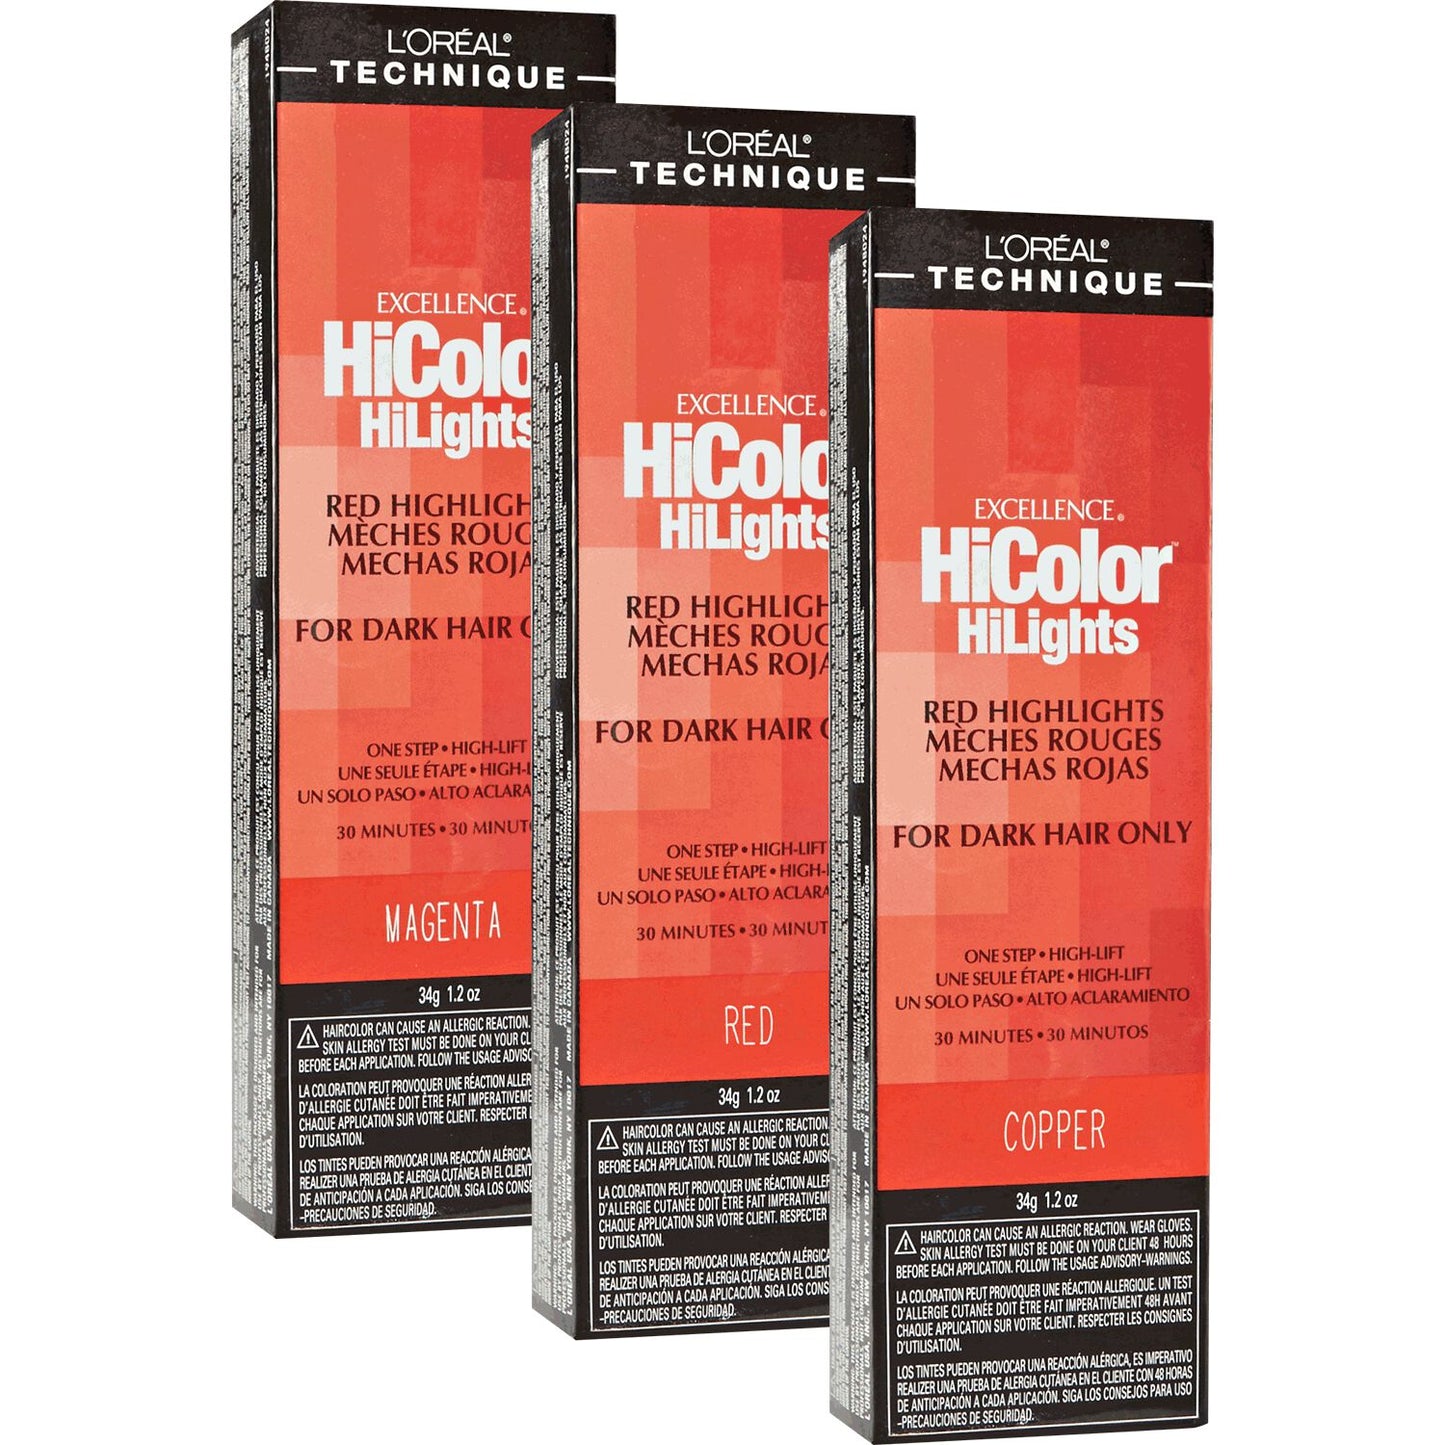 Loreal HiColor Highlights Copper